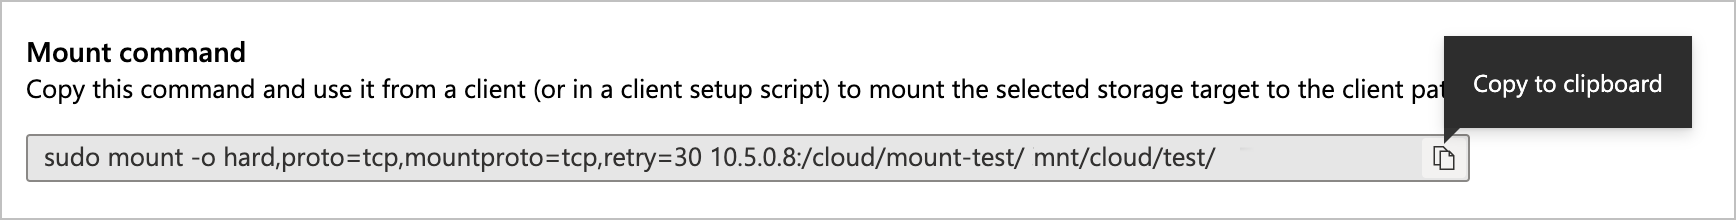 screenshot of the prototype mount command field, showing hover text for the "copy to clipboard" button